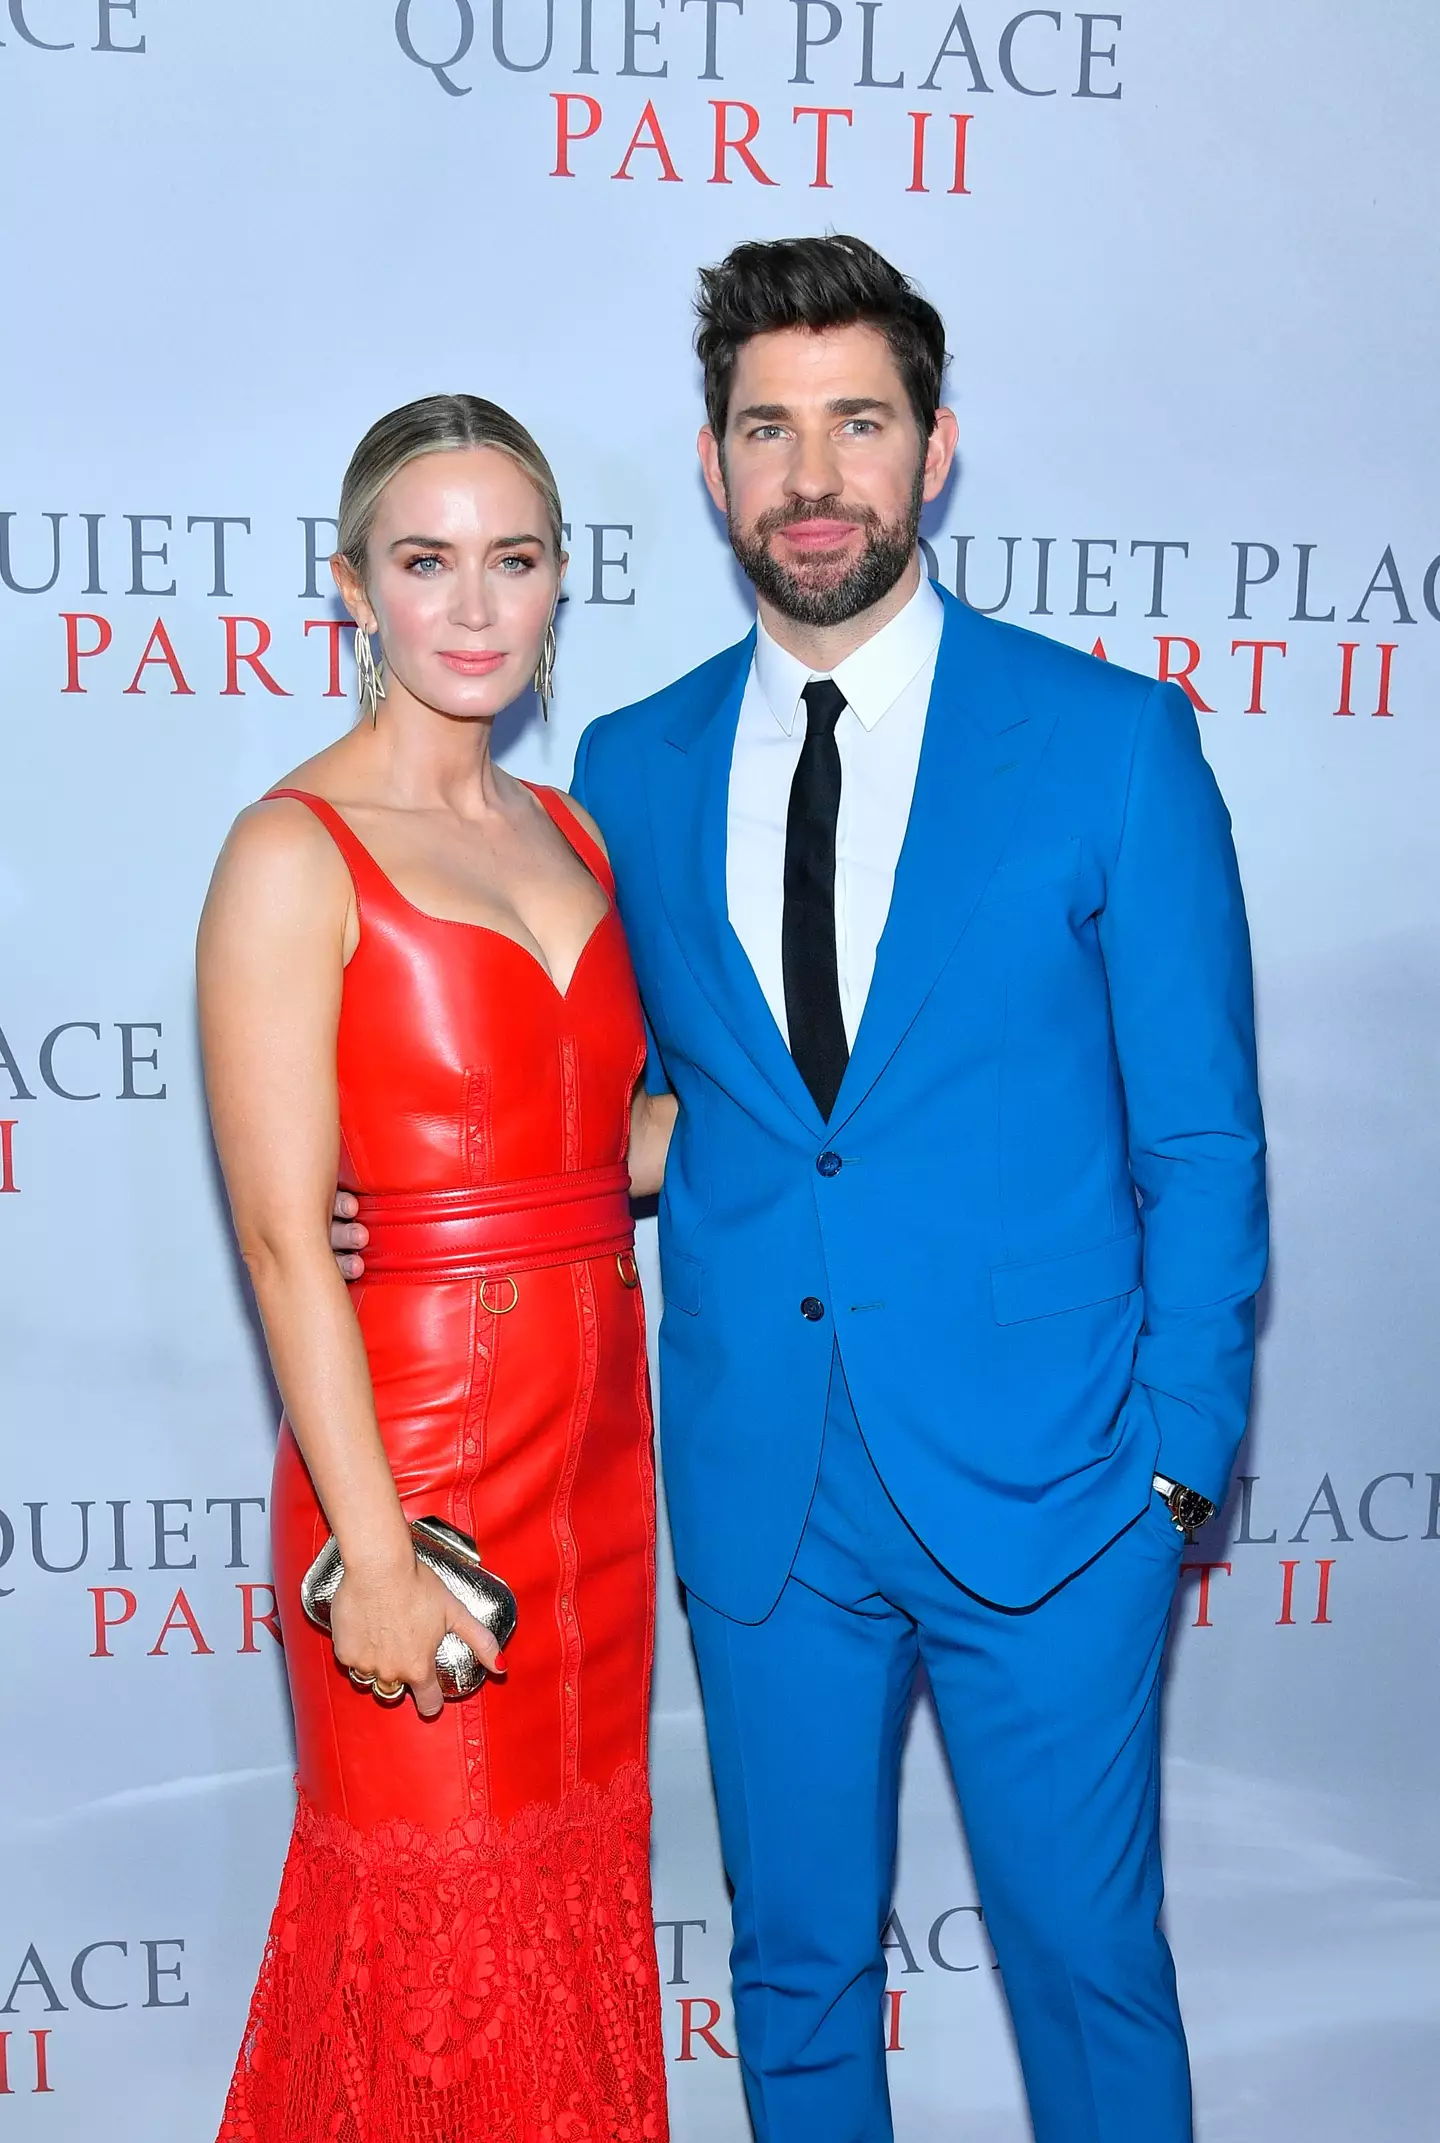 The actress, pictured with husband John Krasinski, has plans to make a movie about stuttering.